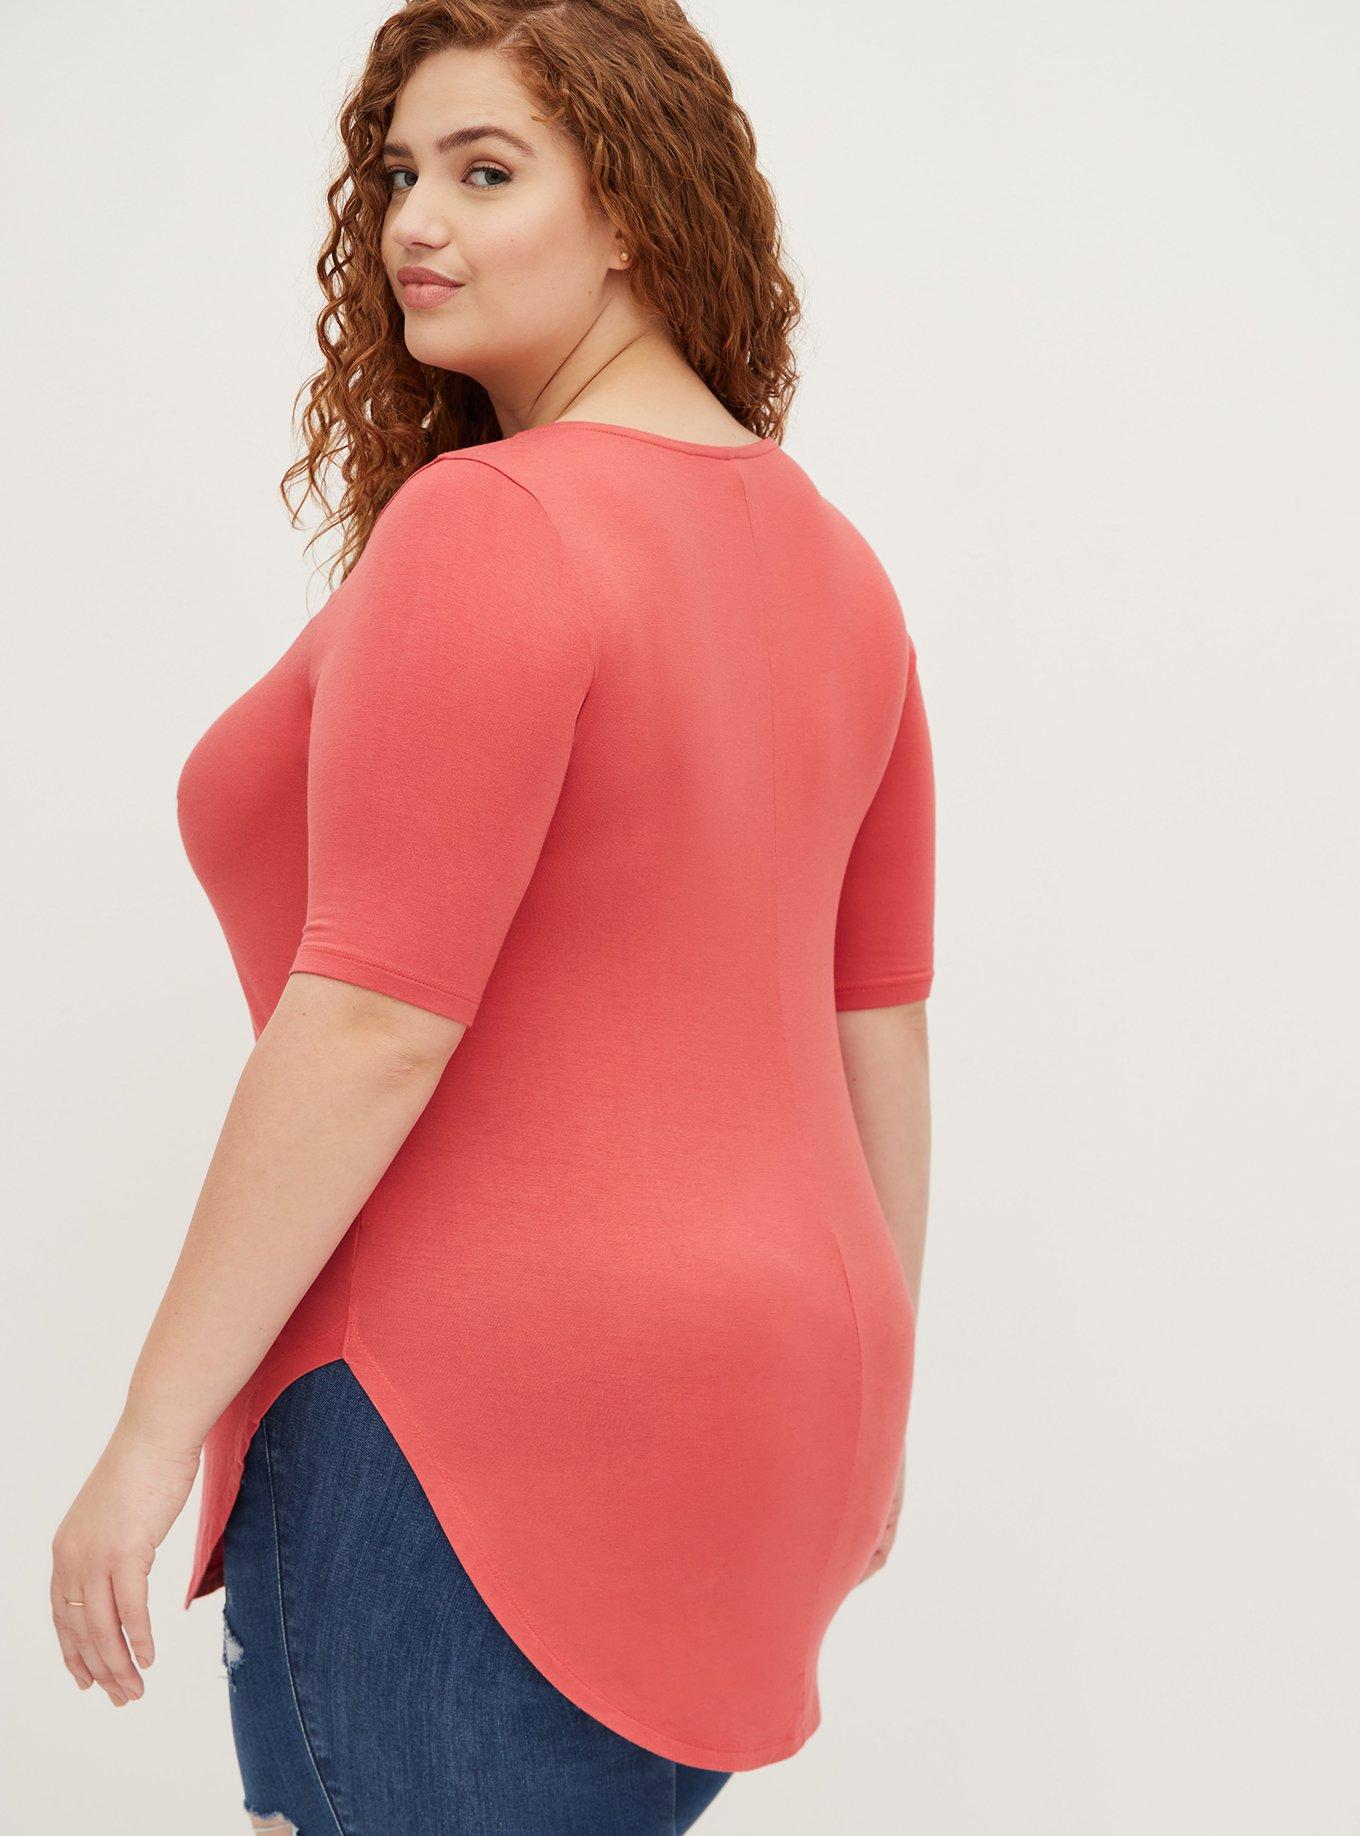 Torrid Plus Size Women's Clothing for sale in Midland, Michigan